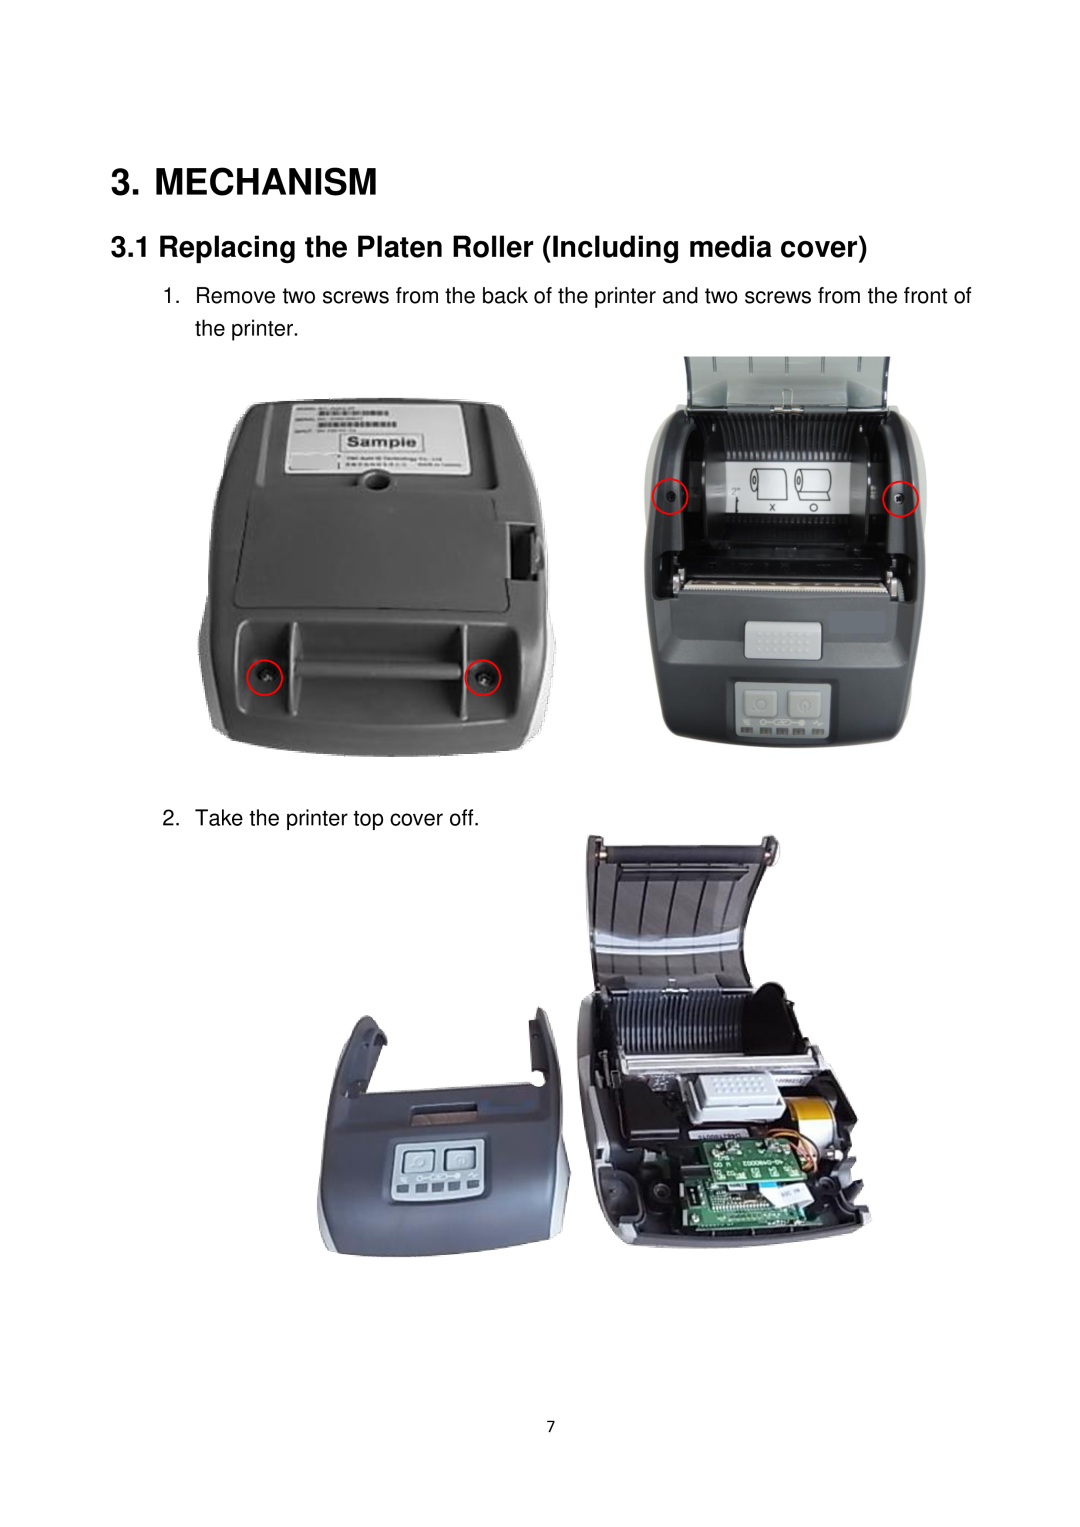 Alpha Vision Tech Alpha-3R service manual Mechanism, Take the printer top cover off 